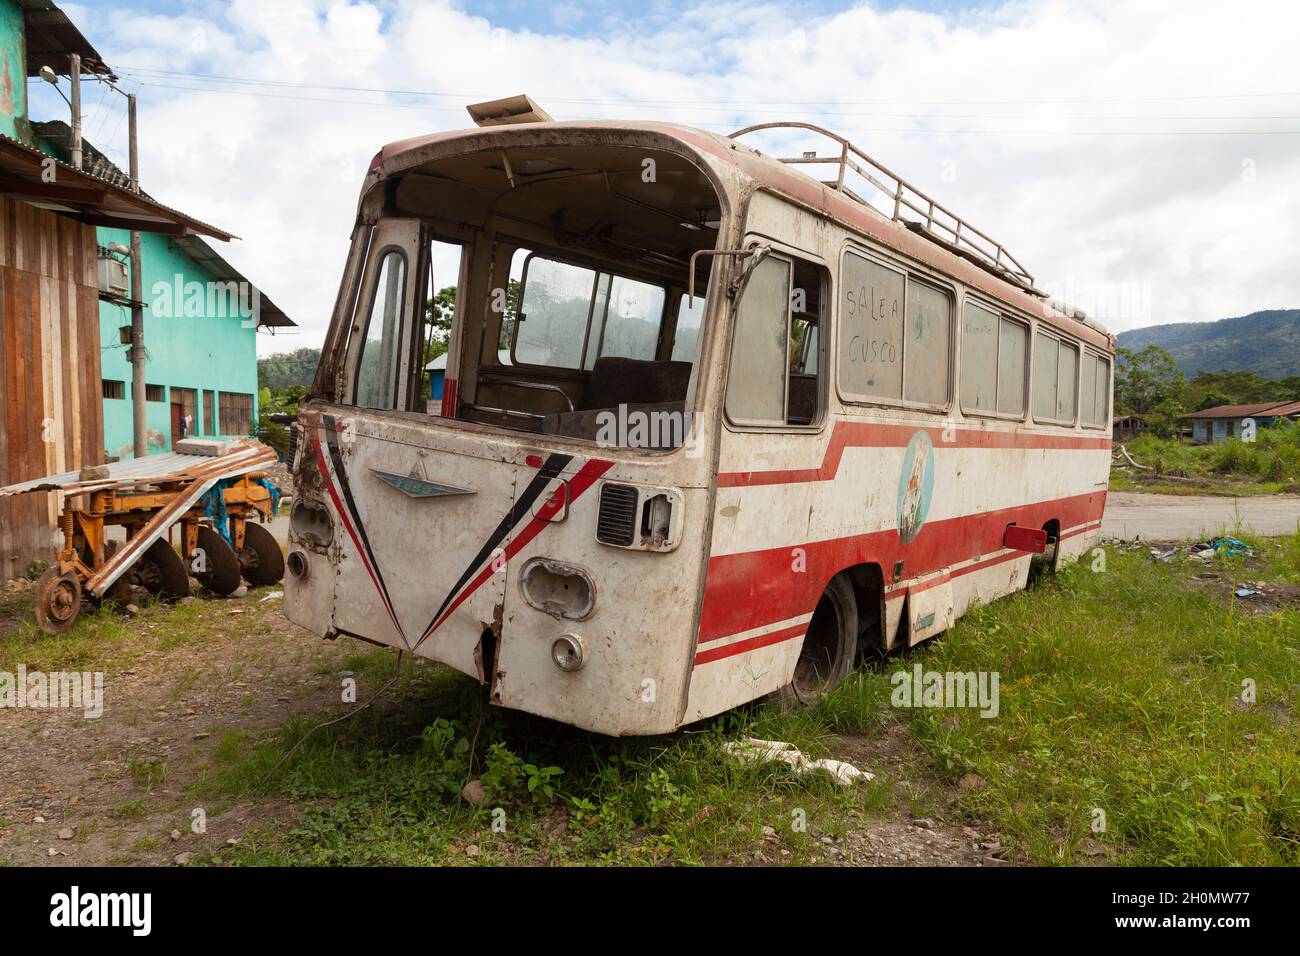 Pilcopata, Peru - April 12, 2014: An old, rusty, dusty and abandoned Fuso bus, rests in the surroundings of the small town of Pilcopata Stock Photo